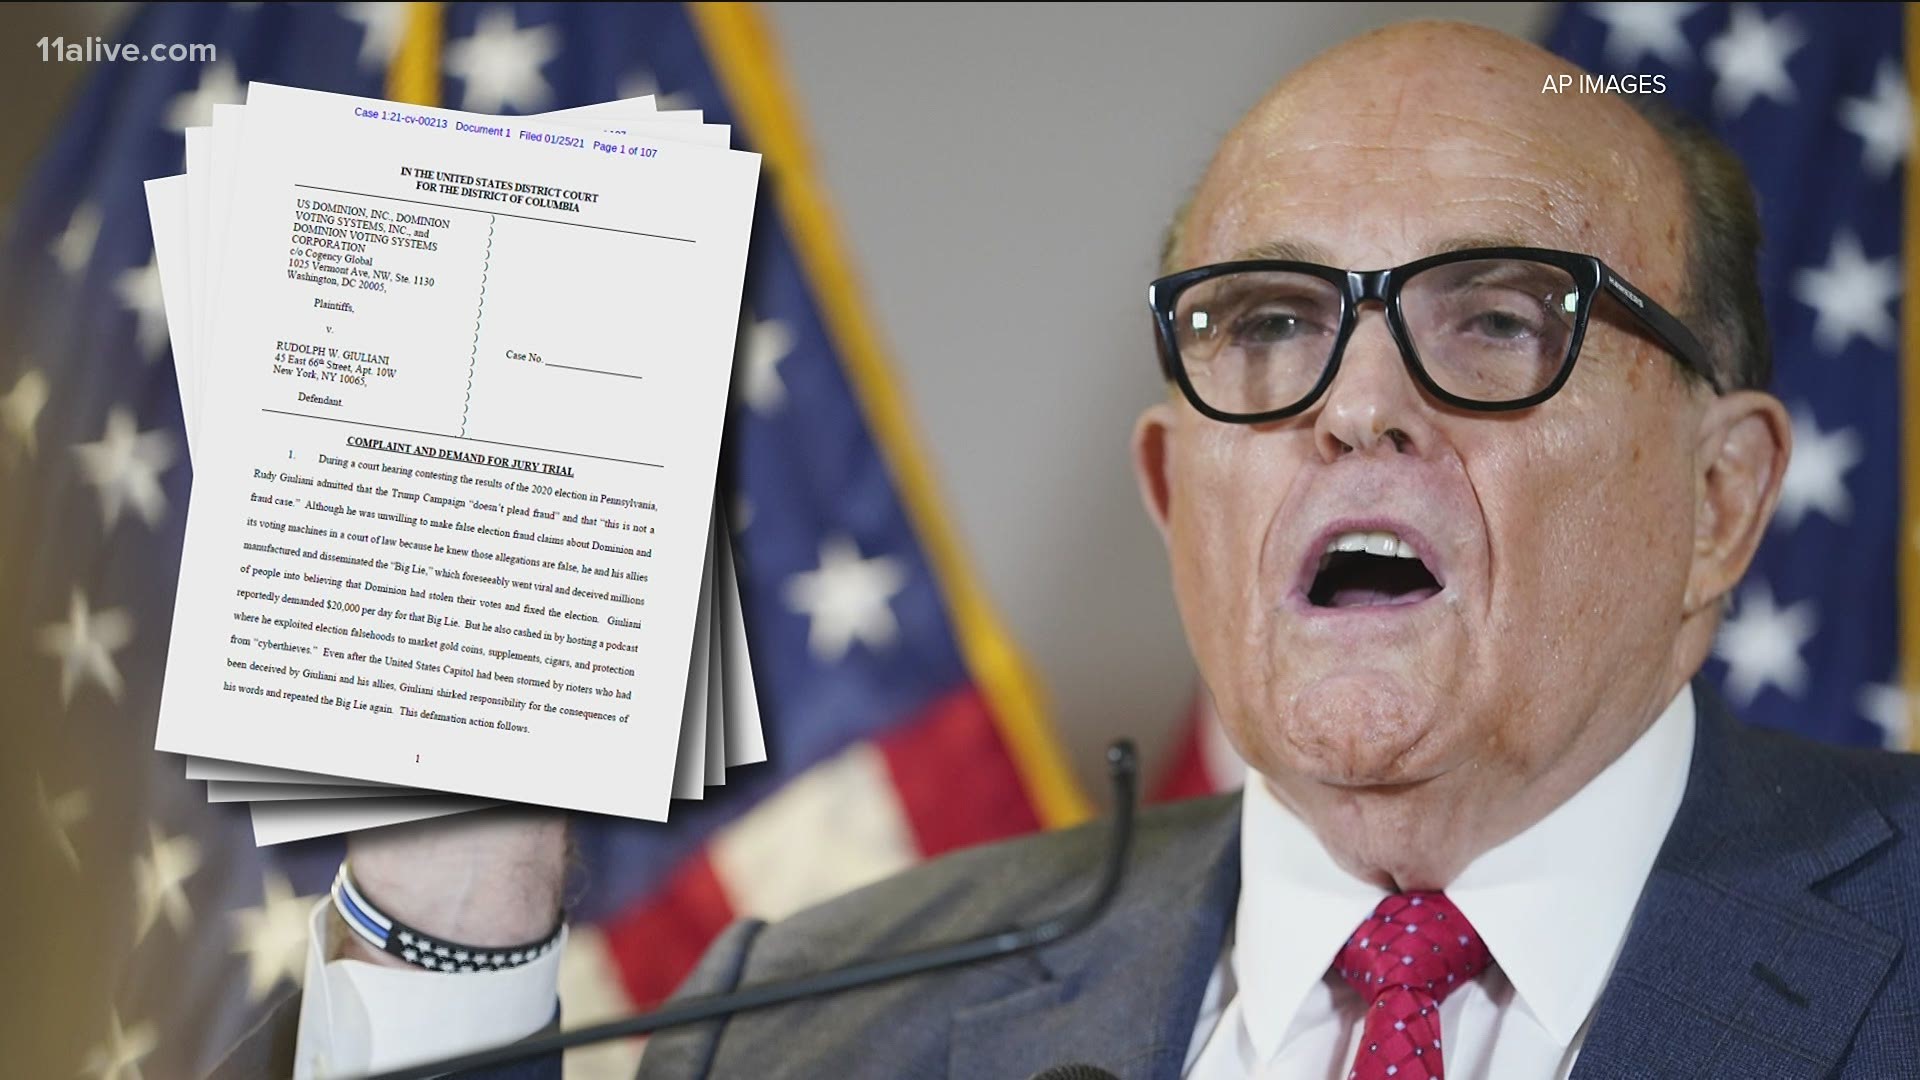 Dominion is seeking more than $1.3 billion in damages against former President Donald Trump's lawyer Rudy Giuliani.